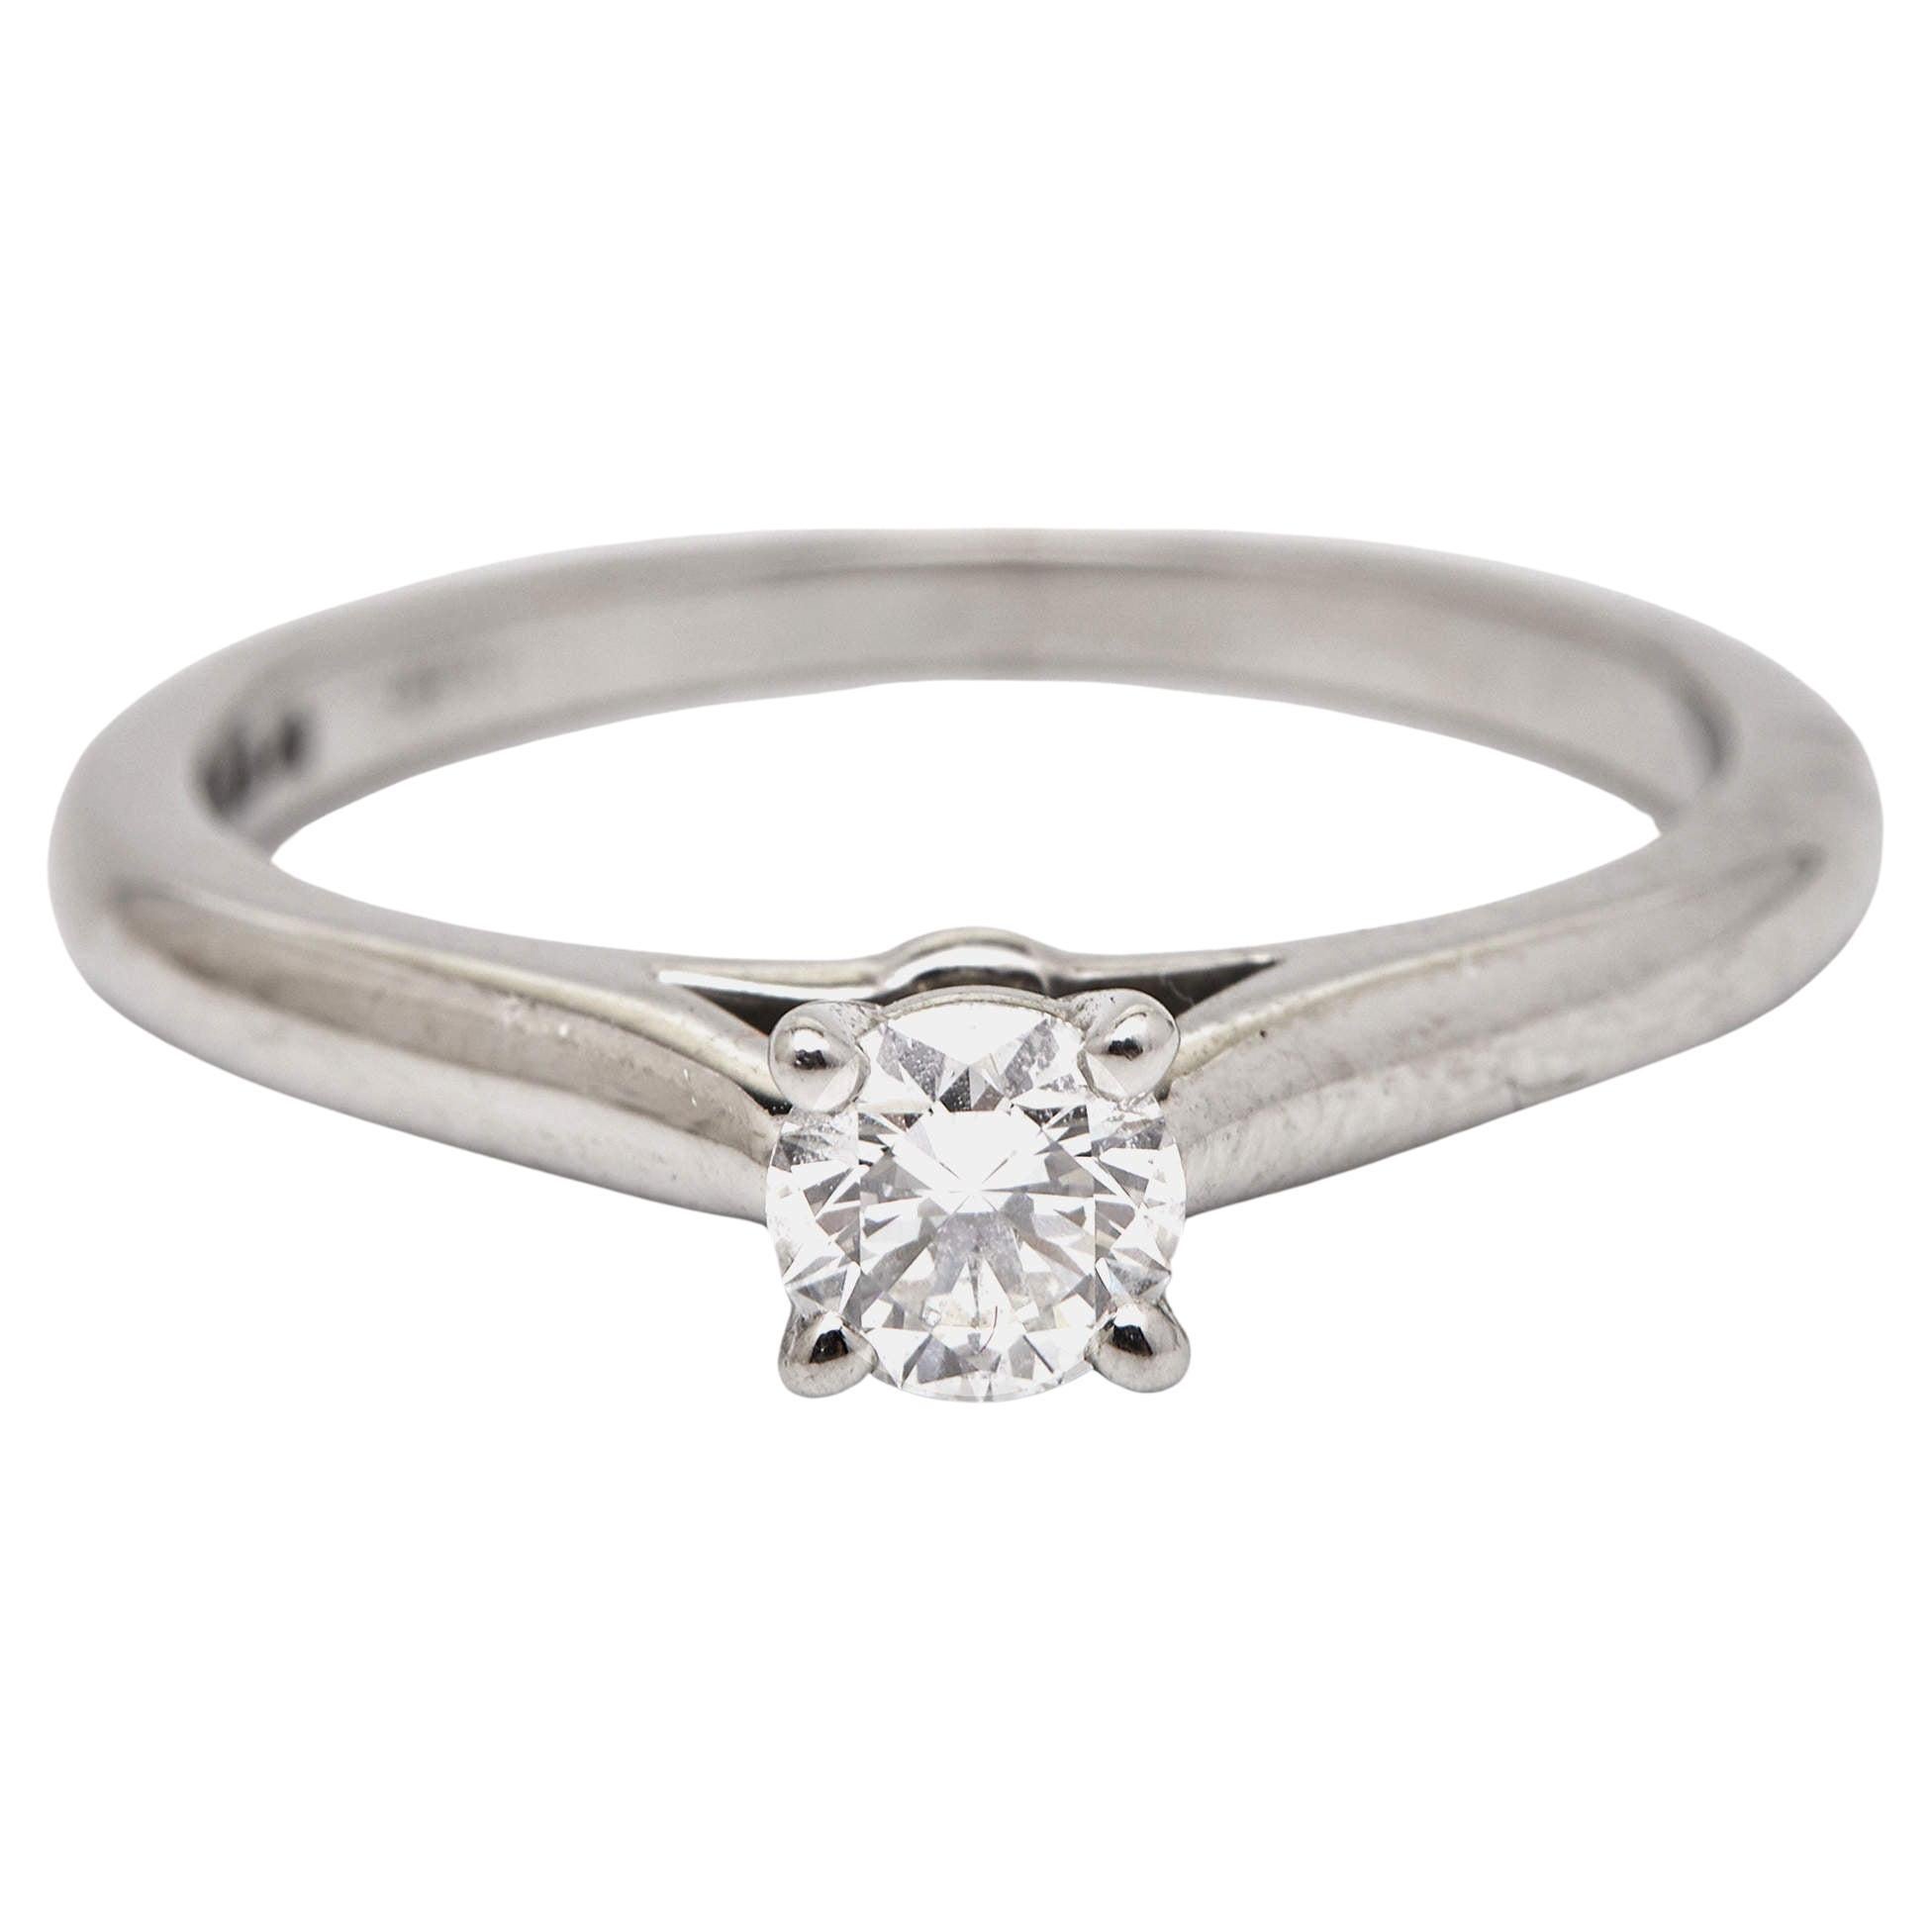 Cartier's 1895 solitaire ring is a carefully sculpted silhouette set to become your favorite everyday jewelry. This Cartier solitaire ring for women is made of platinum, and it has a 0.24 ct center diamond hoisted on a four-prong setting, catching